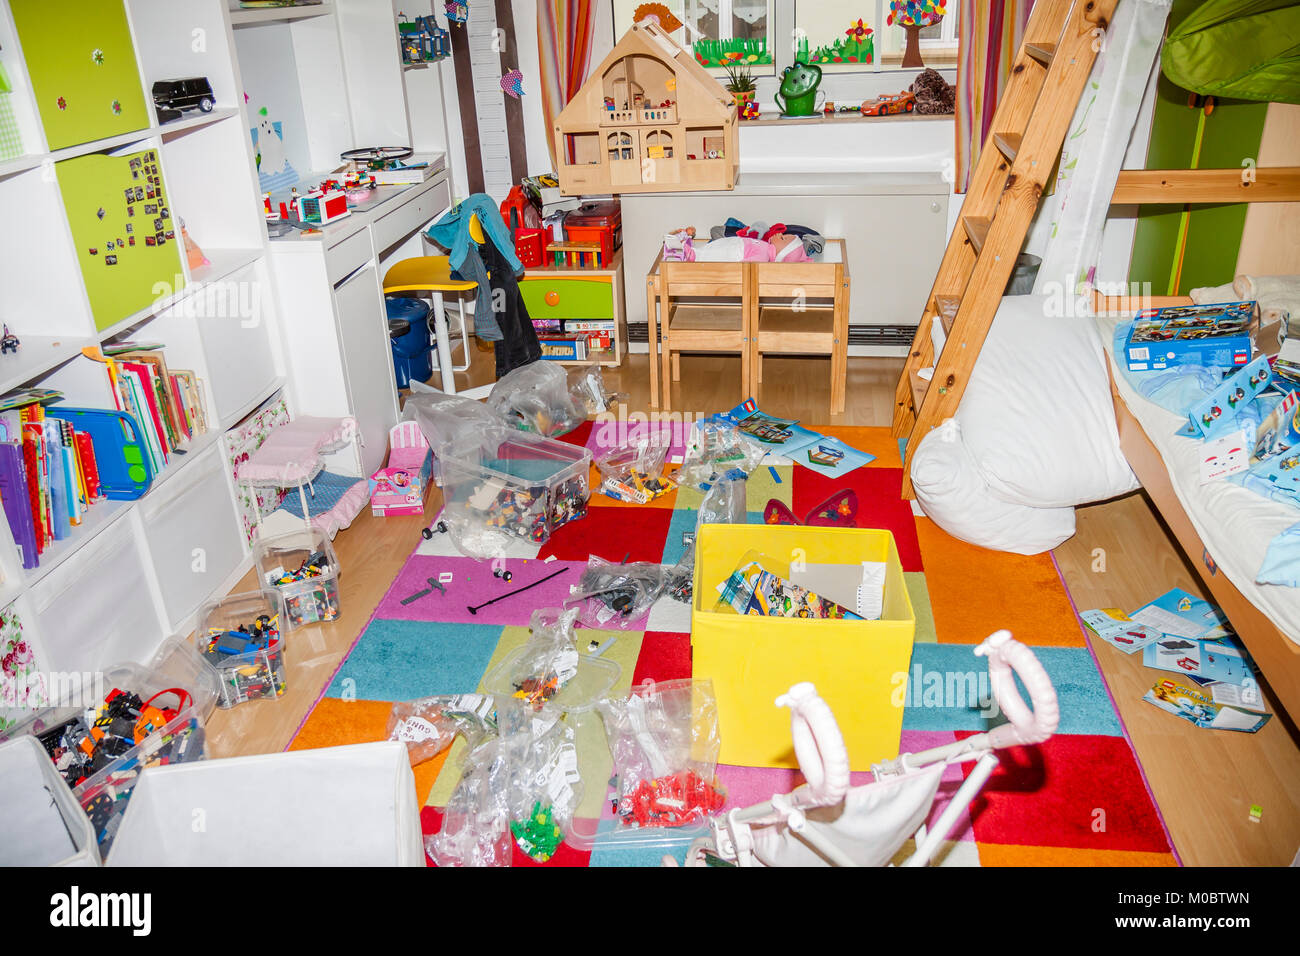 Essen Germany December 27 17 Chaos In The Colorful Children S Room Stock Photo Alamy